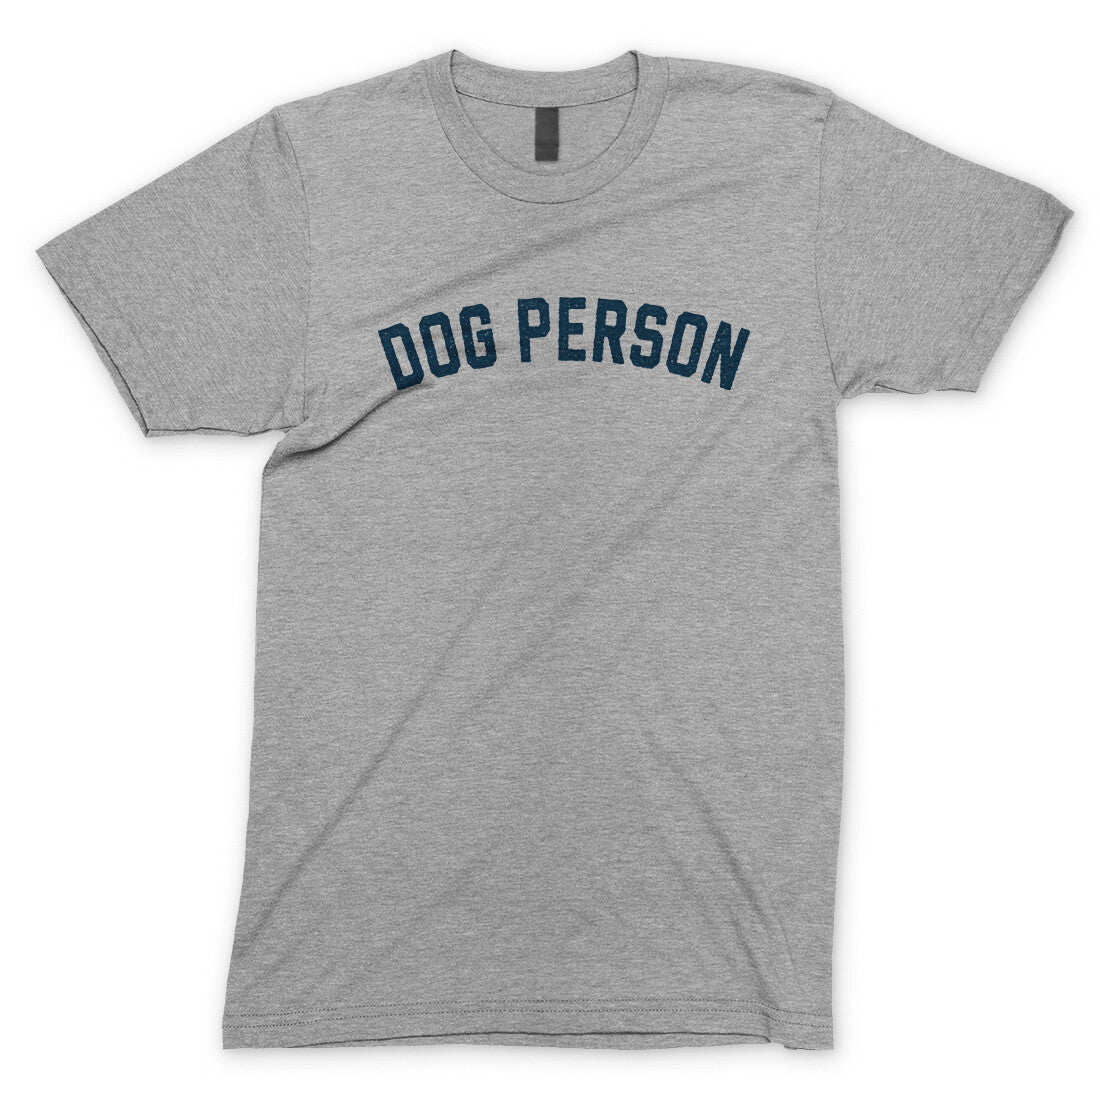 Dog Person in Sport Grey Color